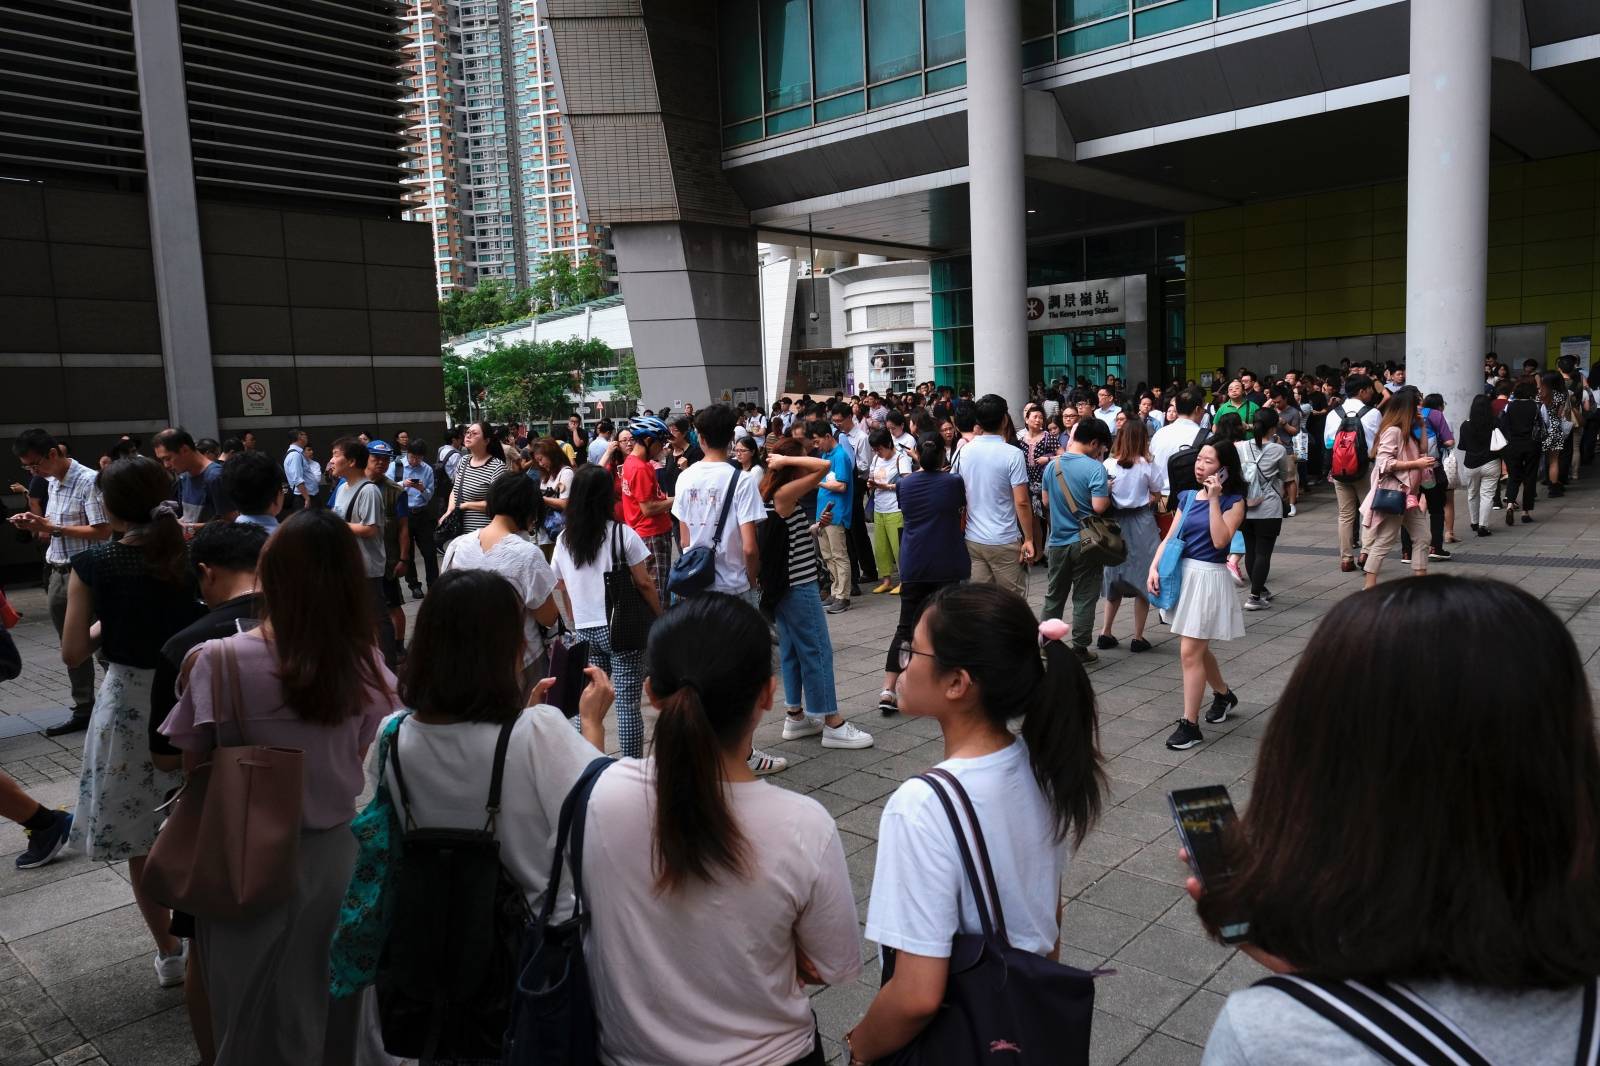 Passengers queue up for shuttle buses as anti-extradition bill demonstrators block the Mass Transit Railway (MTR) train service at a station in Hong Kong